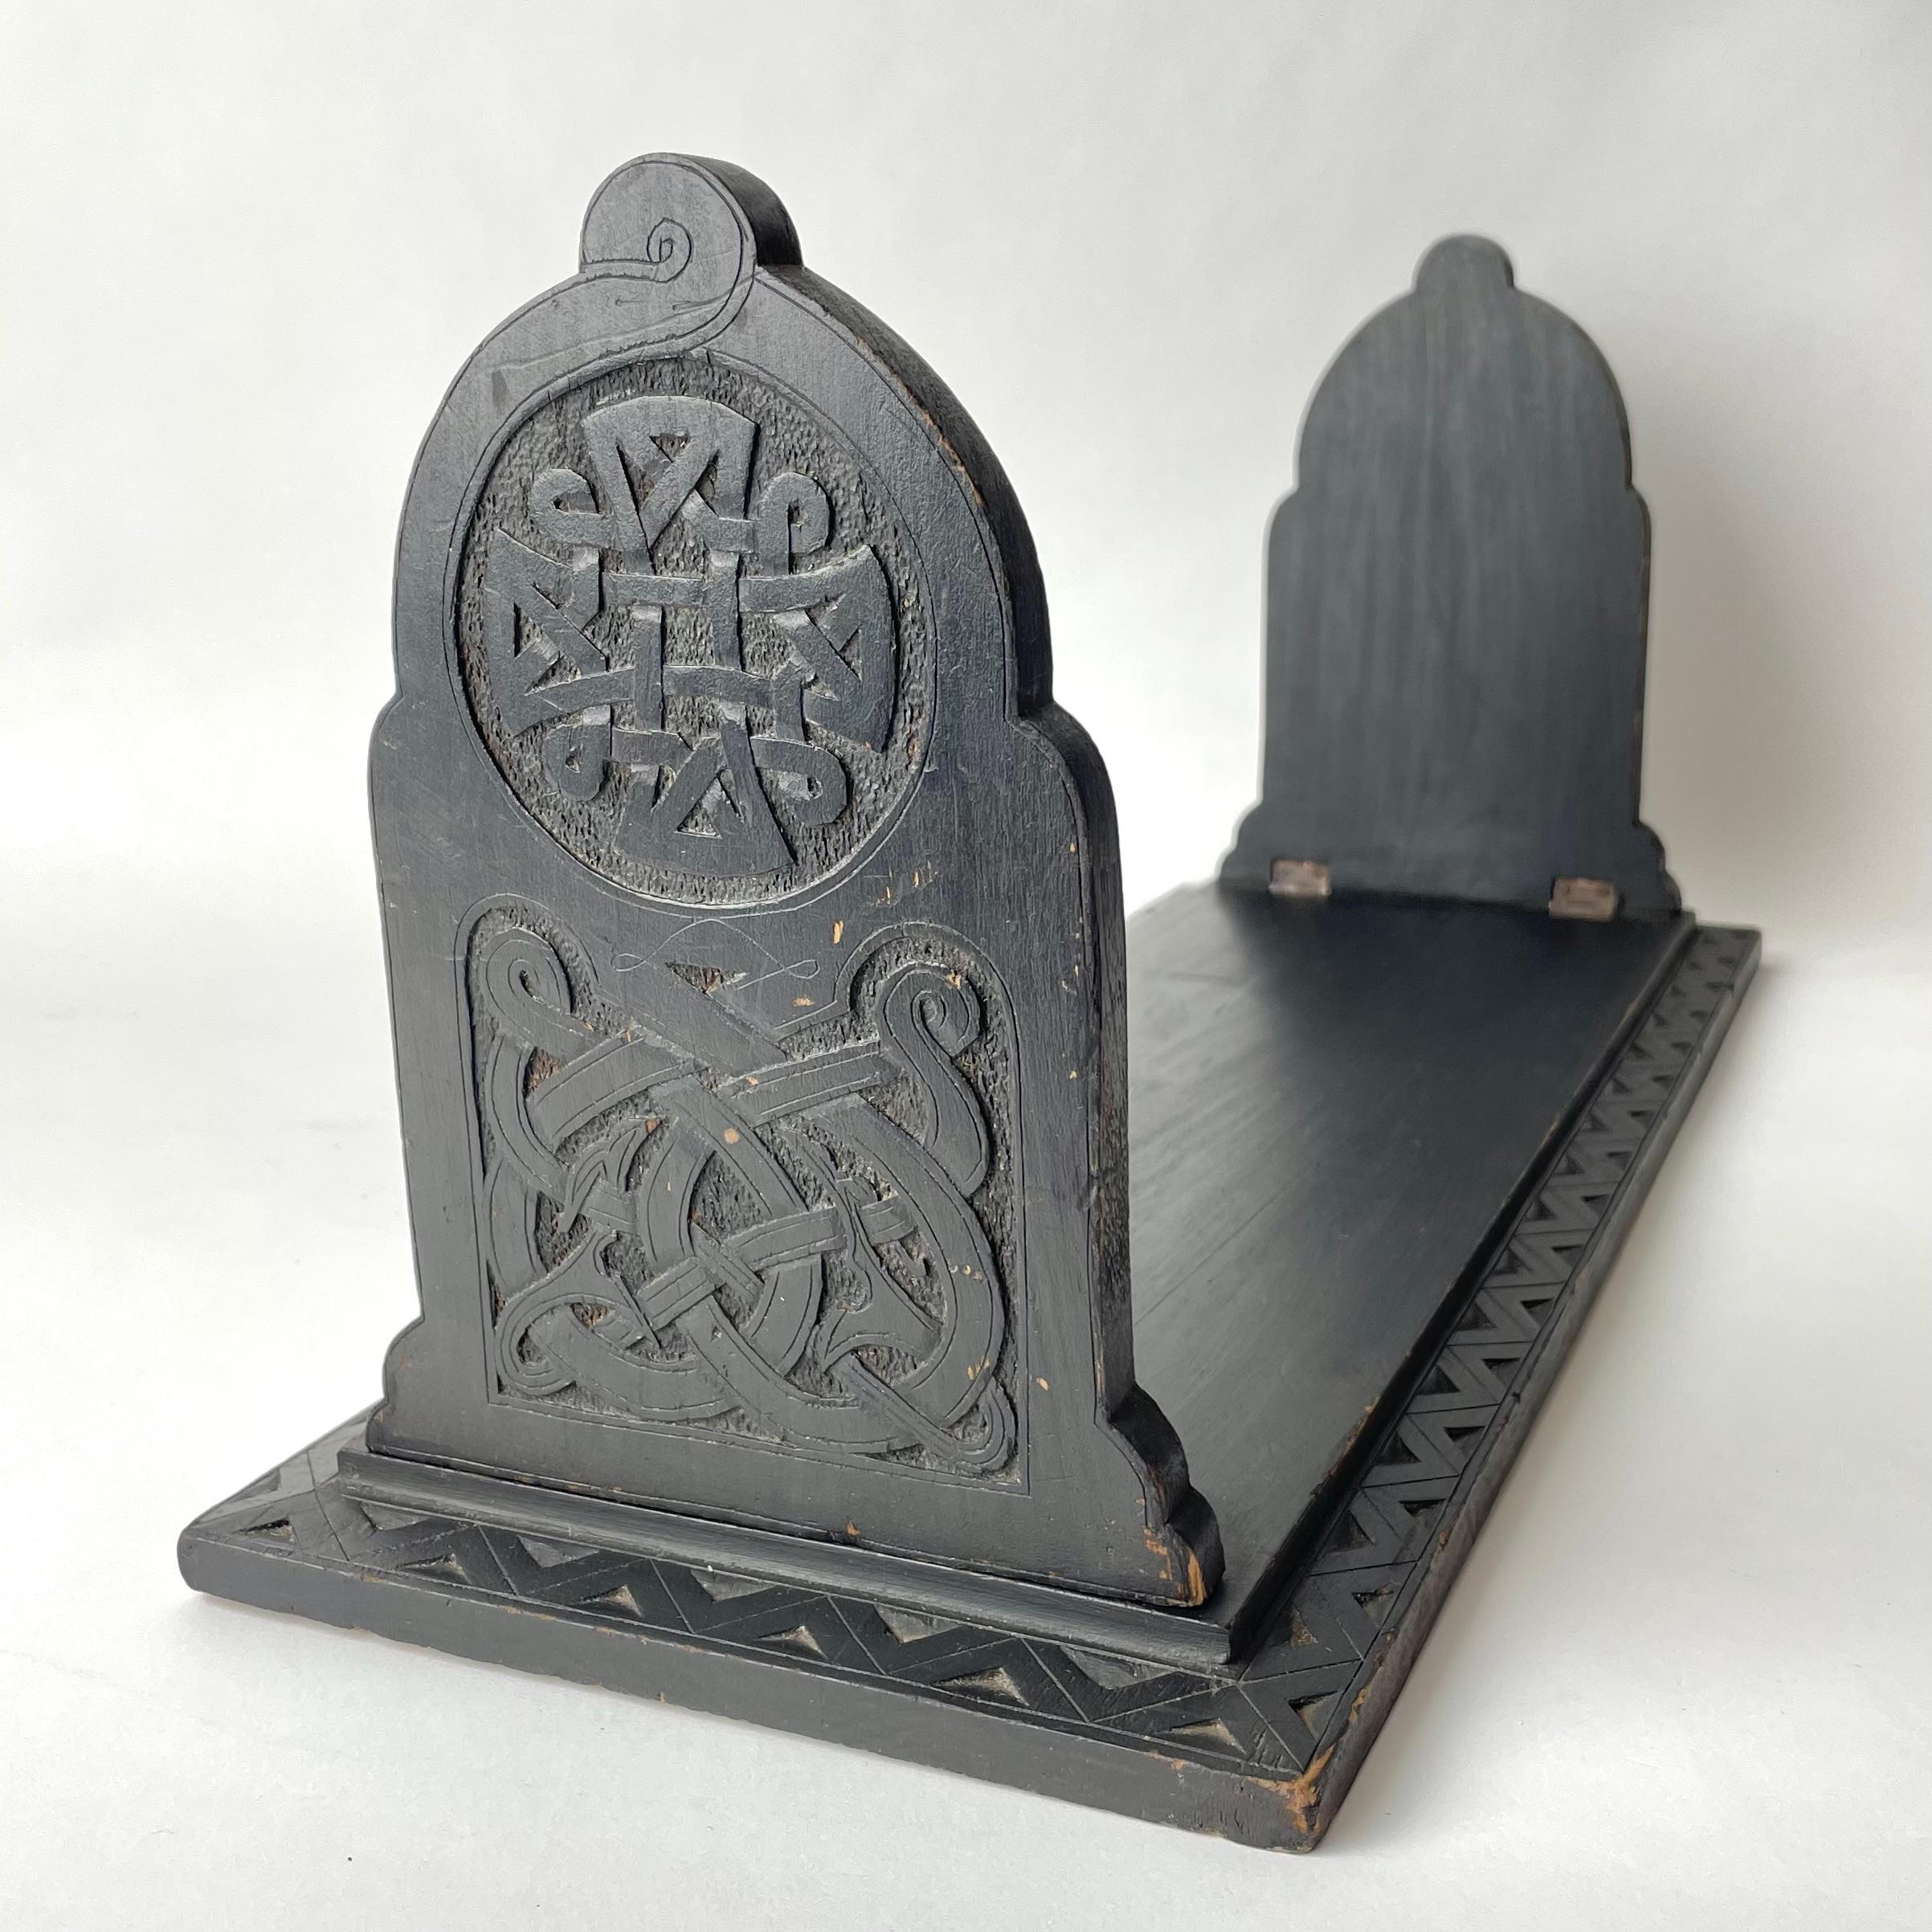 Large Bookend in blackened Birch in Old Norse Style. Made in Sweden during the late 19th Century with a beautiful patina.


Wear consistent with age and use 